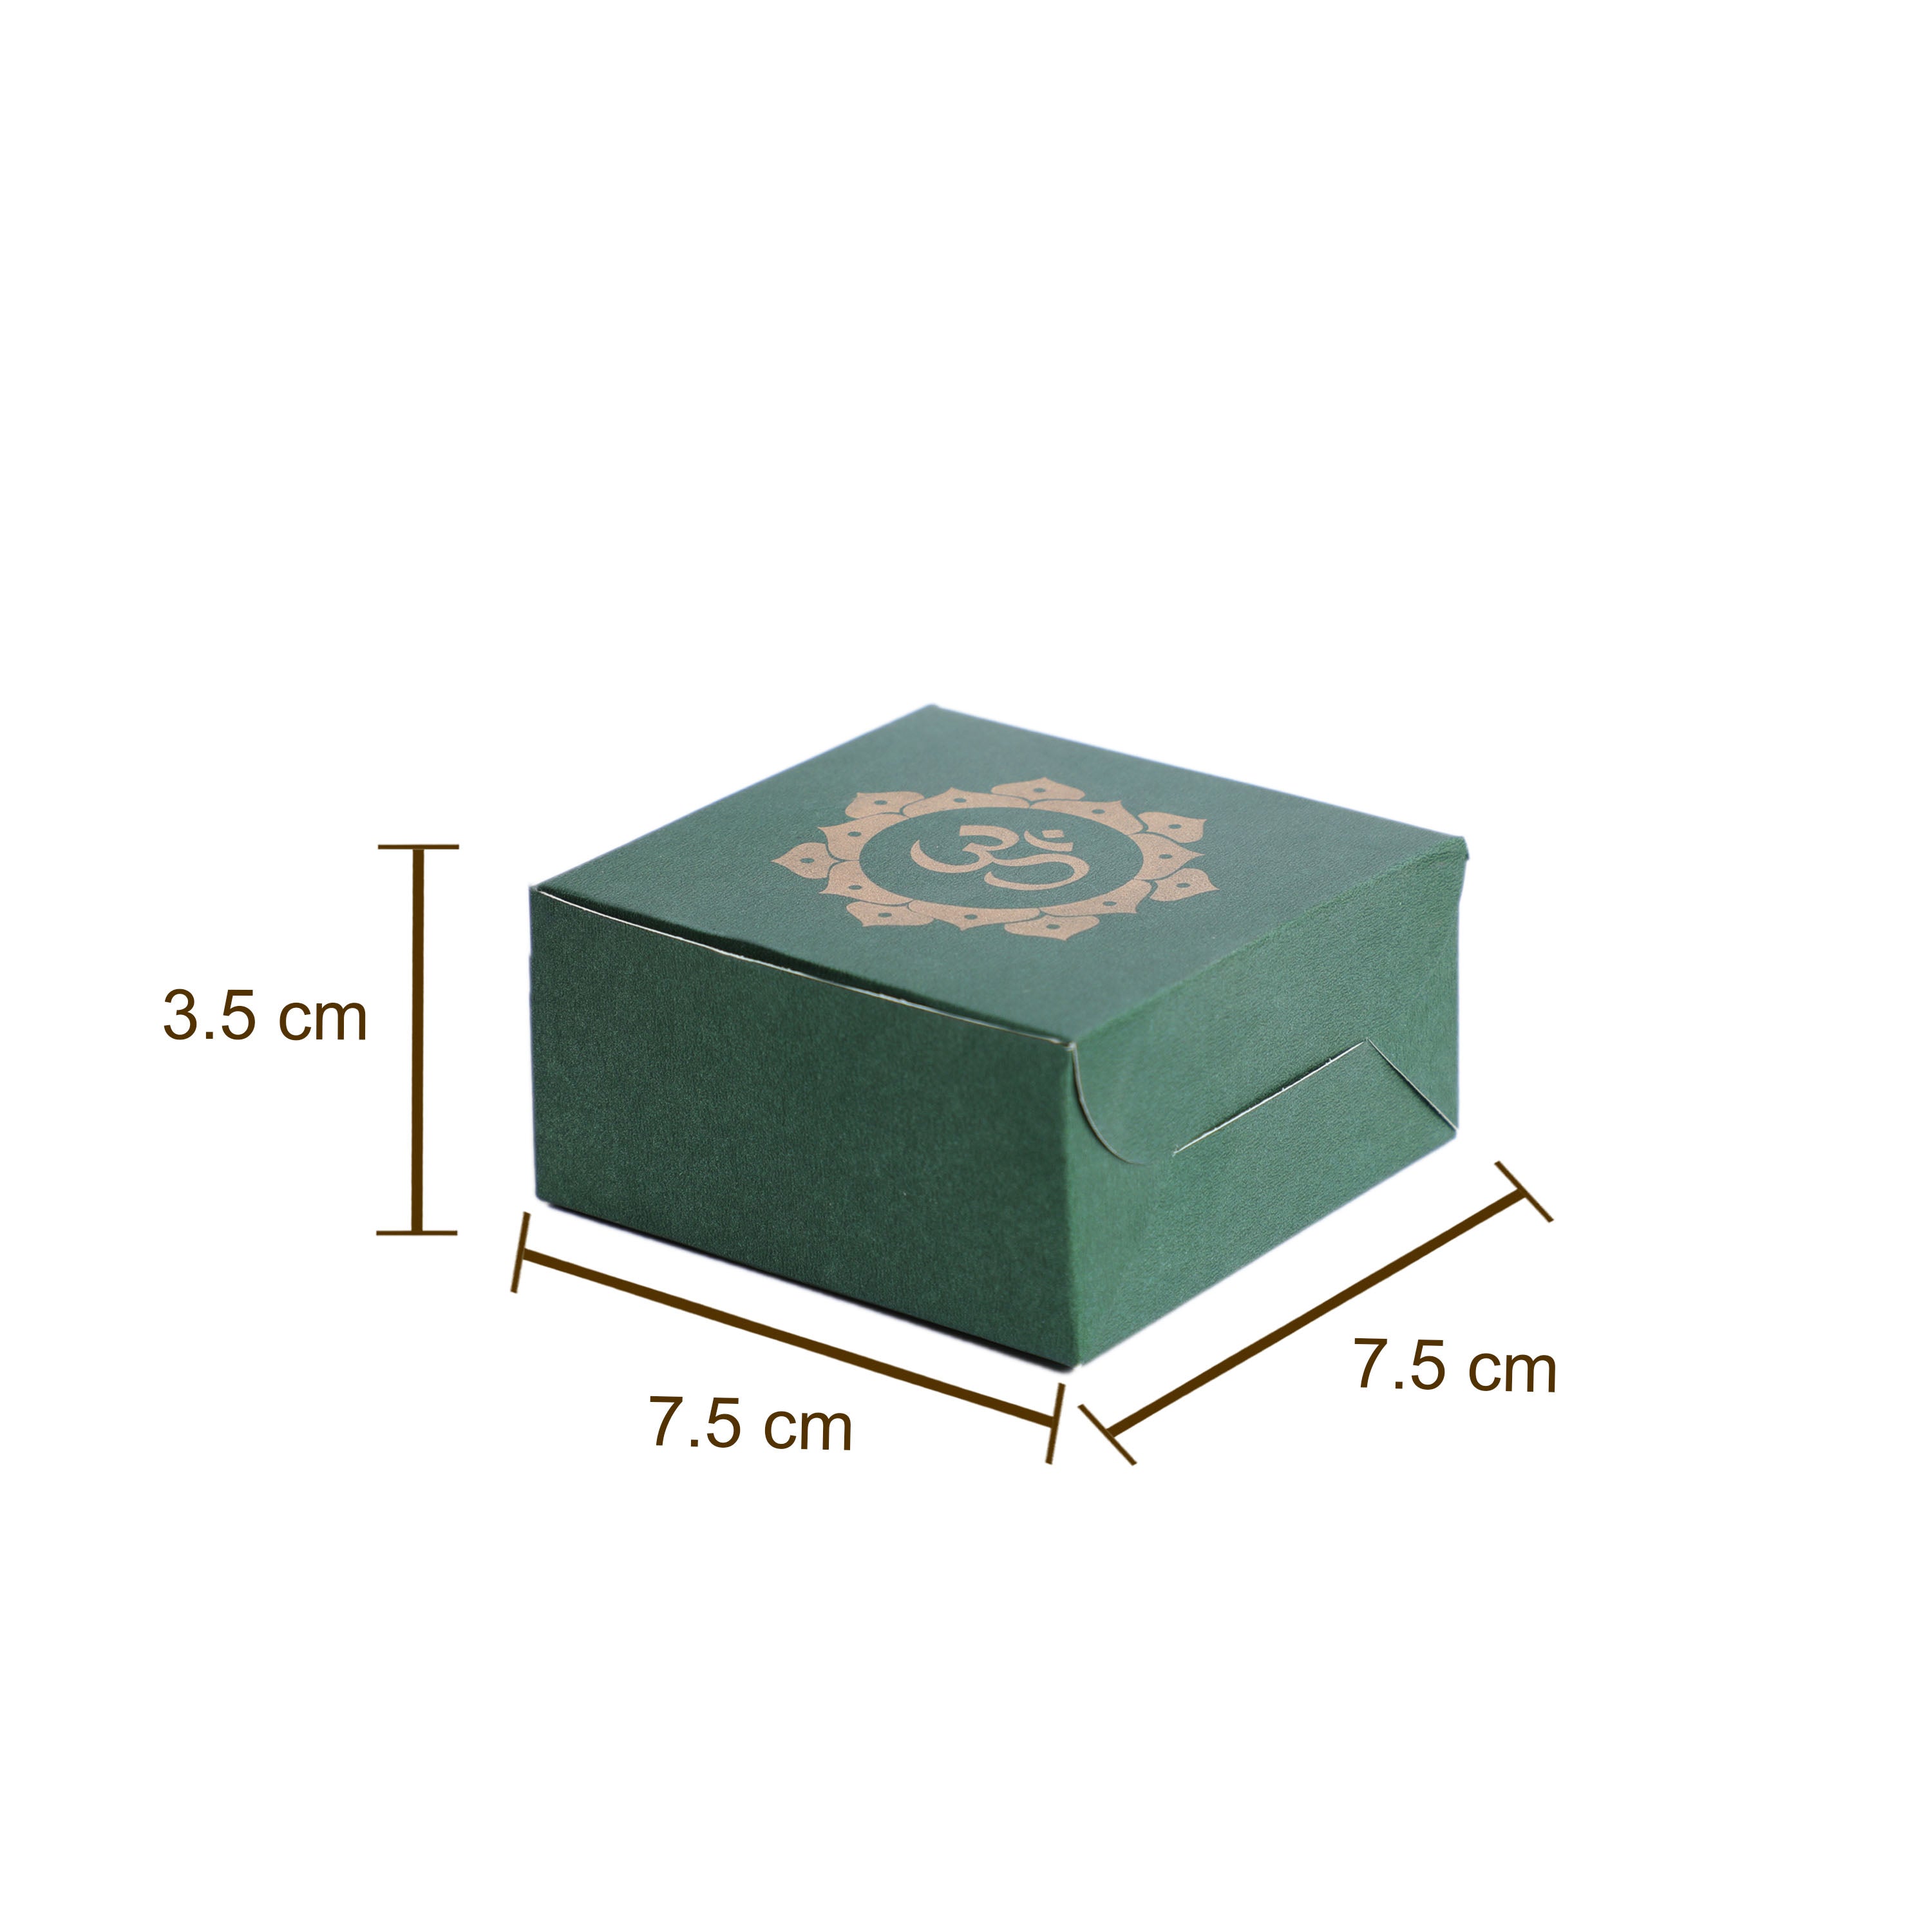 Om printed boxes for wrapping gifts